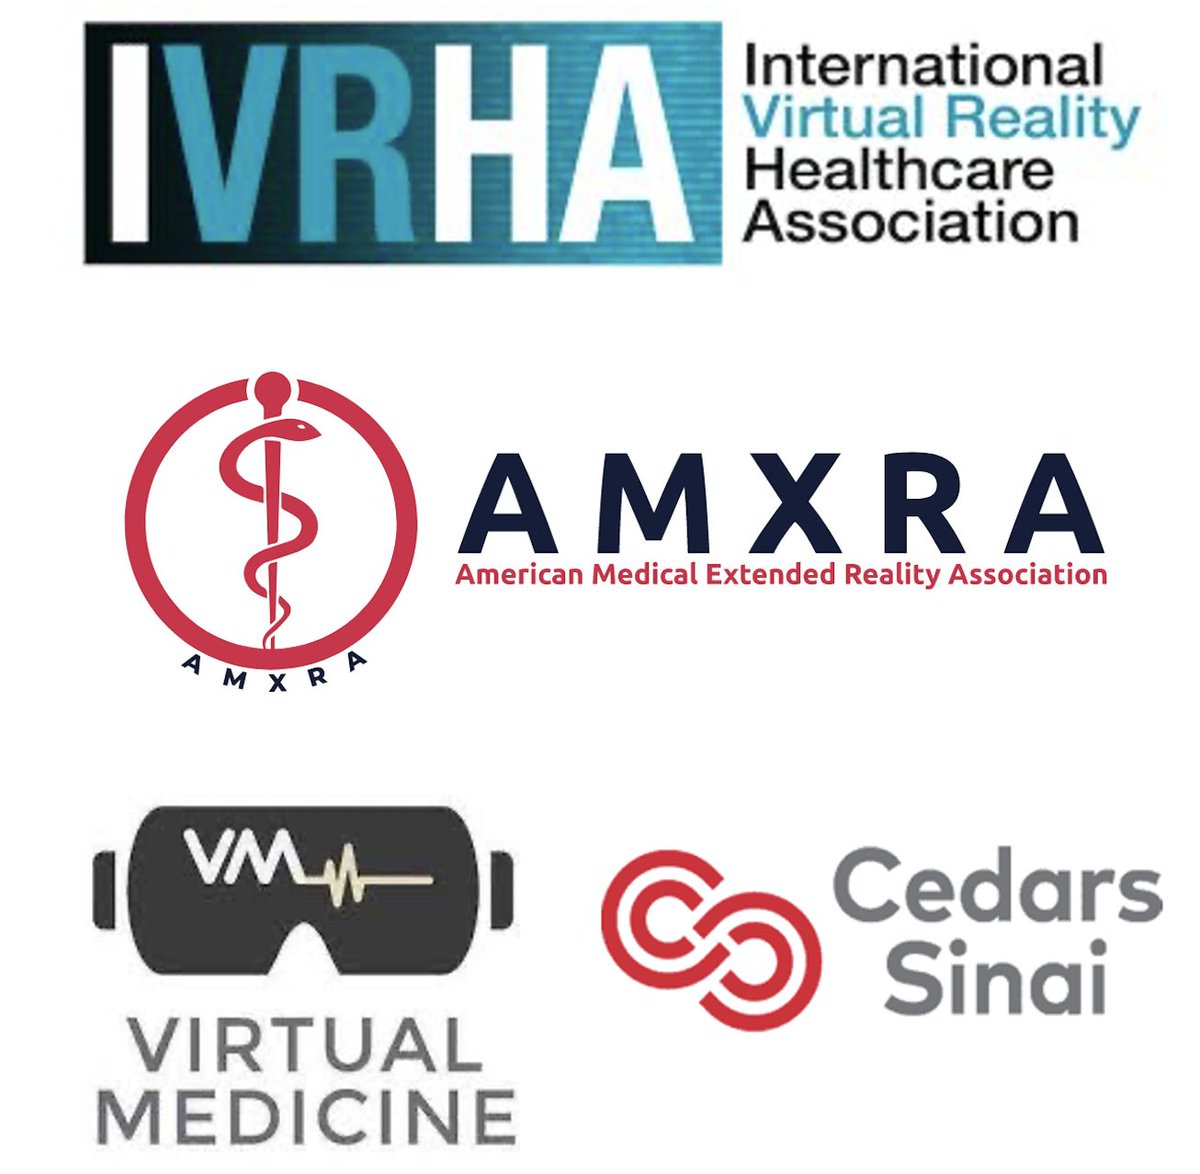 Two medical #XR conferences coming up in March. First is #IVRHA run by @bobfine: health24.ivrha.org/?_gl=1%2A6lags…. Second is Virtual Medicine through #CedarsSinai. Both supported by @theAMXRA via @markzhangdo. Exciting to see the rising tide float all boats in this collegial field!